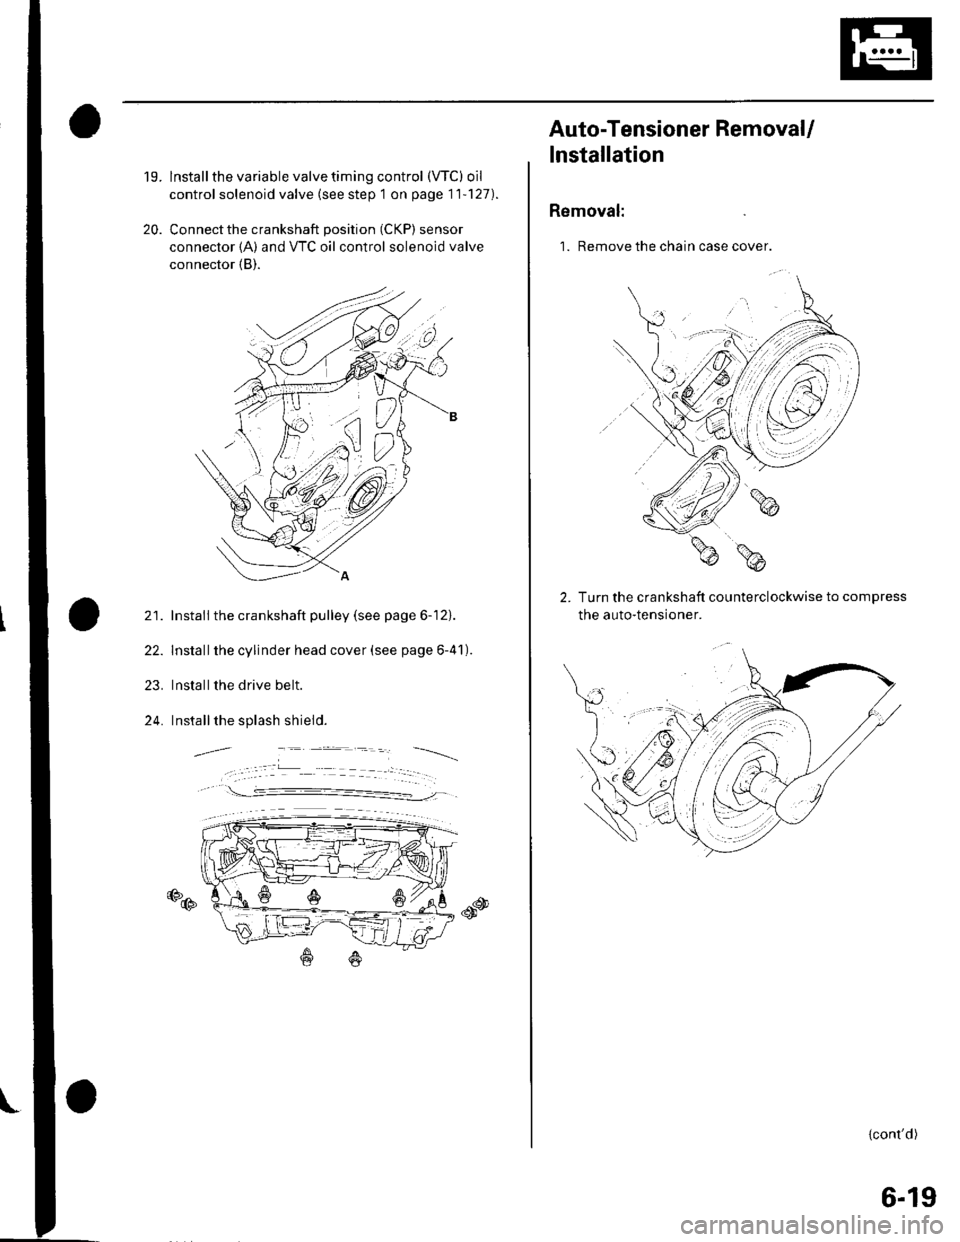 HONDA CIVIC 2003 7.G Owners Manual 19.
20.
lnstall the variable valve timing control (VTC) oil
control solenoid valve (see step 1 on page 11127).
Connect the crankshaft position (CKP) sensor
connector {A) and VTC oil control solenoid 